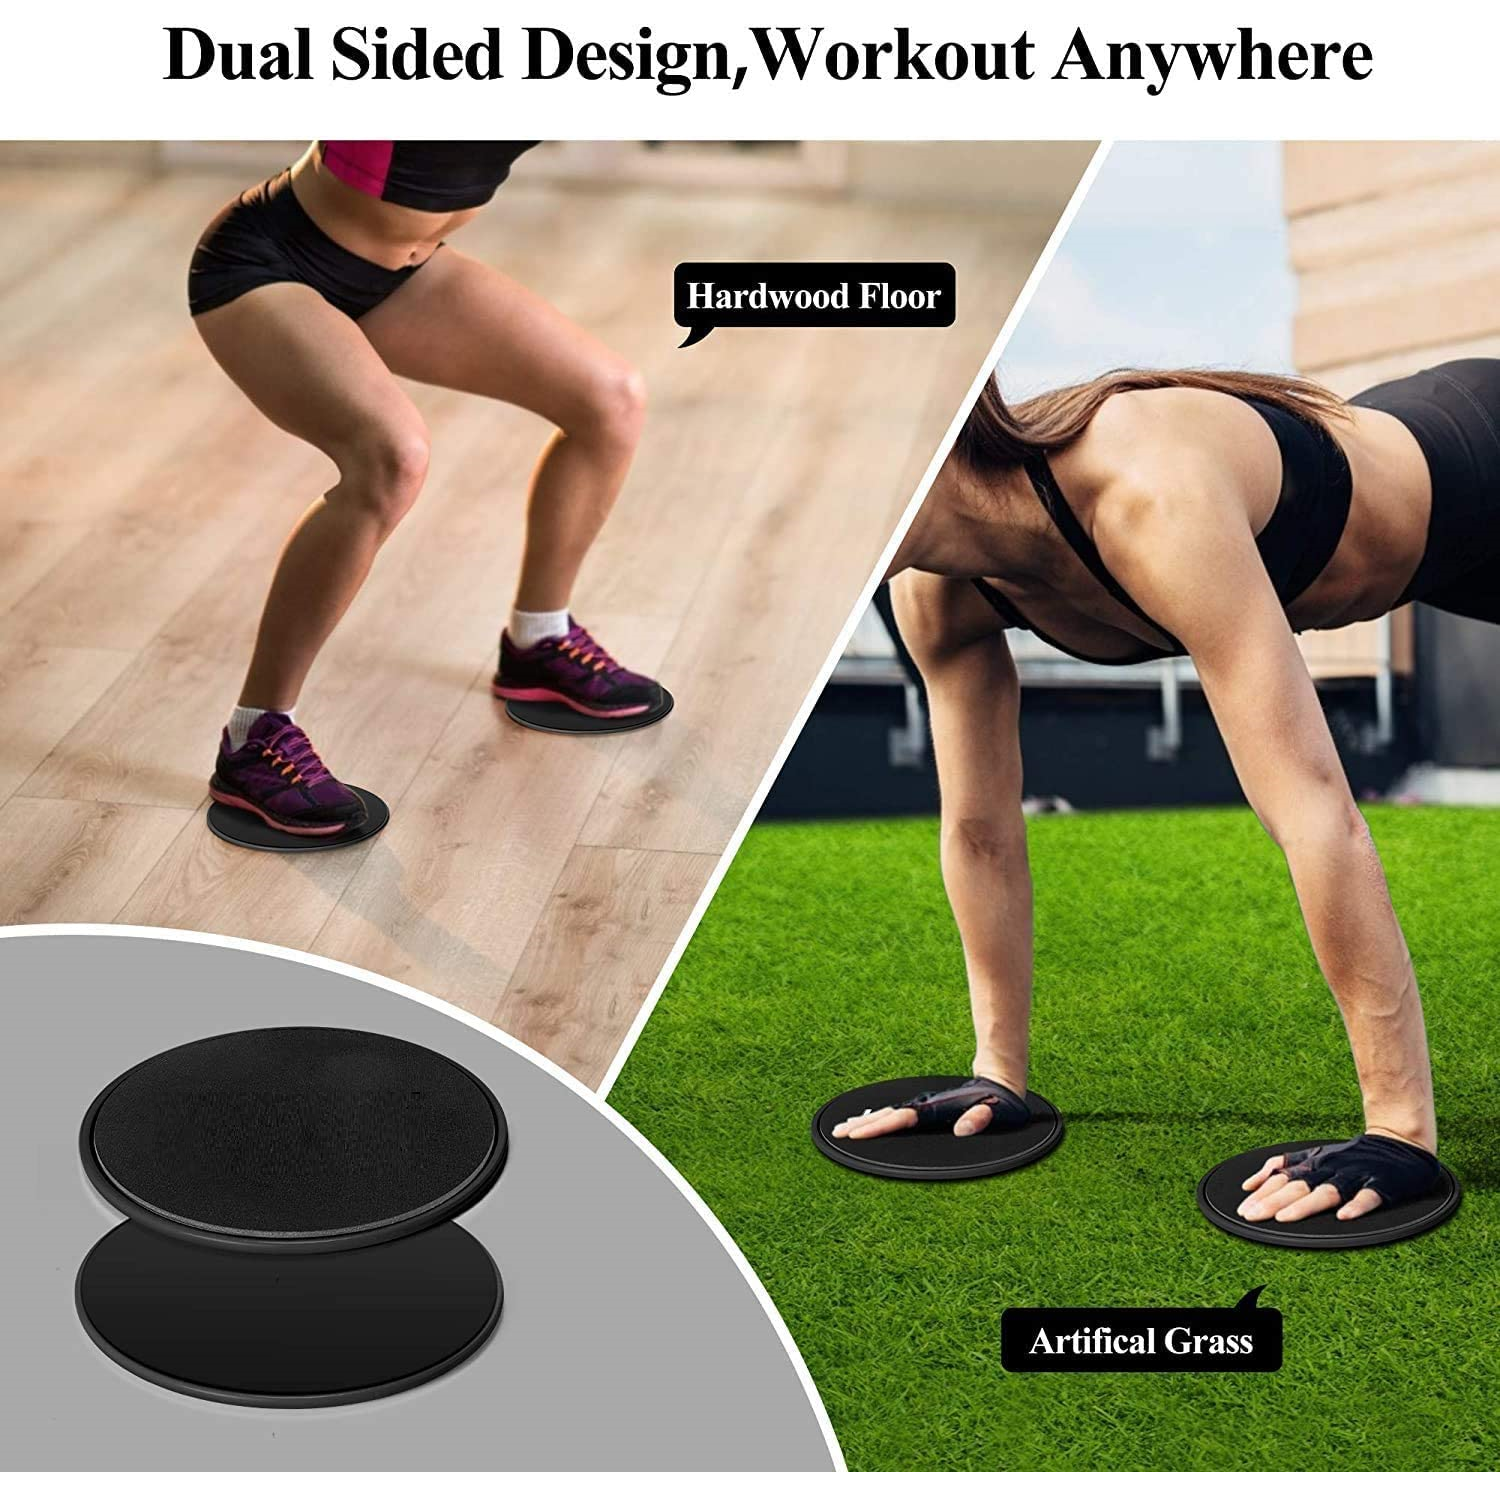 ISTAR Core Sliders for Working Out on Carpet Wood and Floor to sculpt your  core, Best Sized Non Slip Exercise Sliders Gliding Discs for feet